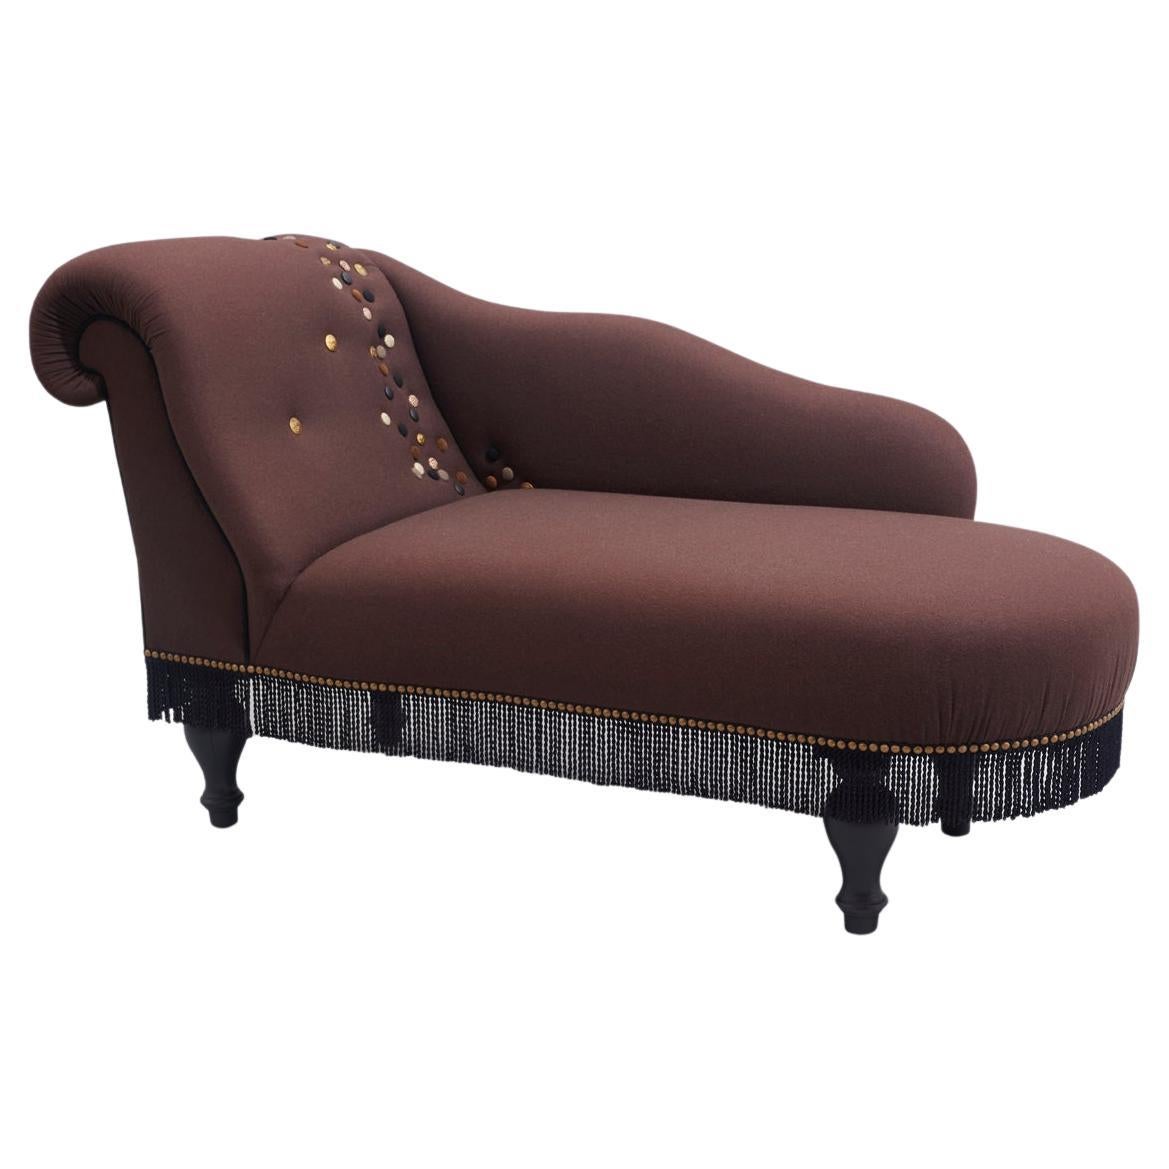 1920 Style Chaise Longues In Brown Wool Fabric And Brass Leather Button Detail